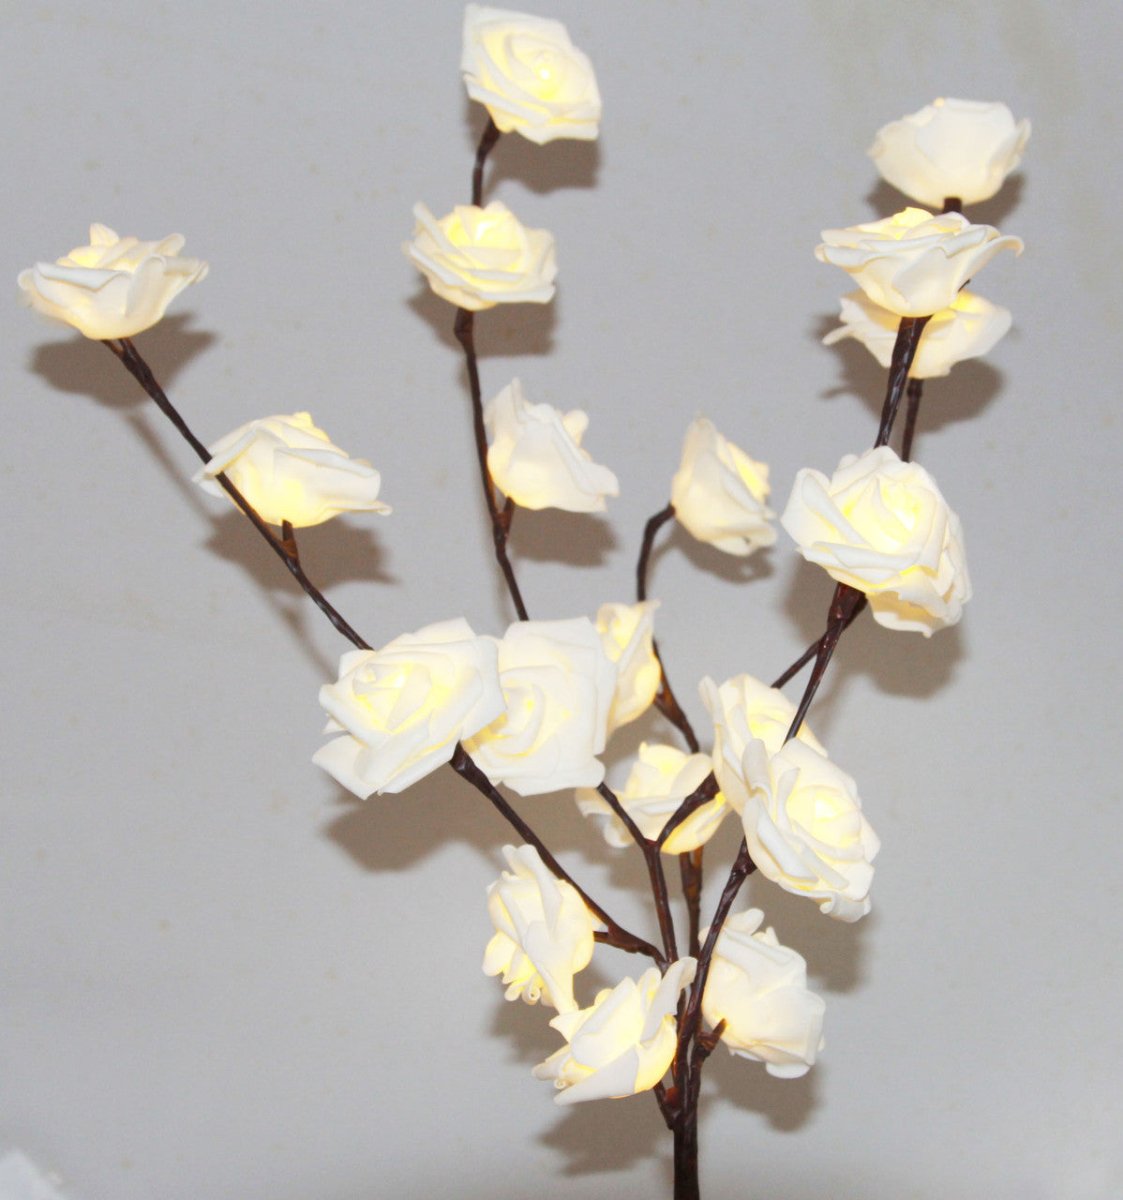 1 Set of 20 LED White Rose Tree Branch Fairy Lights - Ideal for Wedding, Party and Event Decoration - Outdoorium